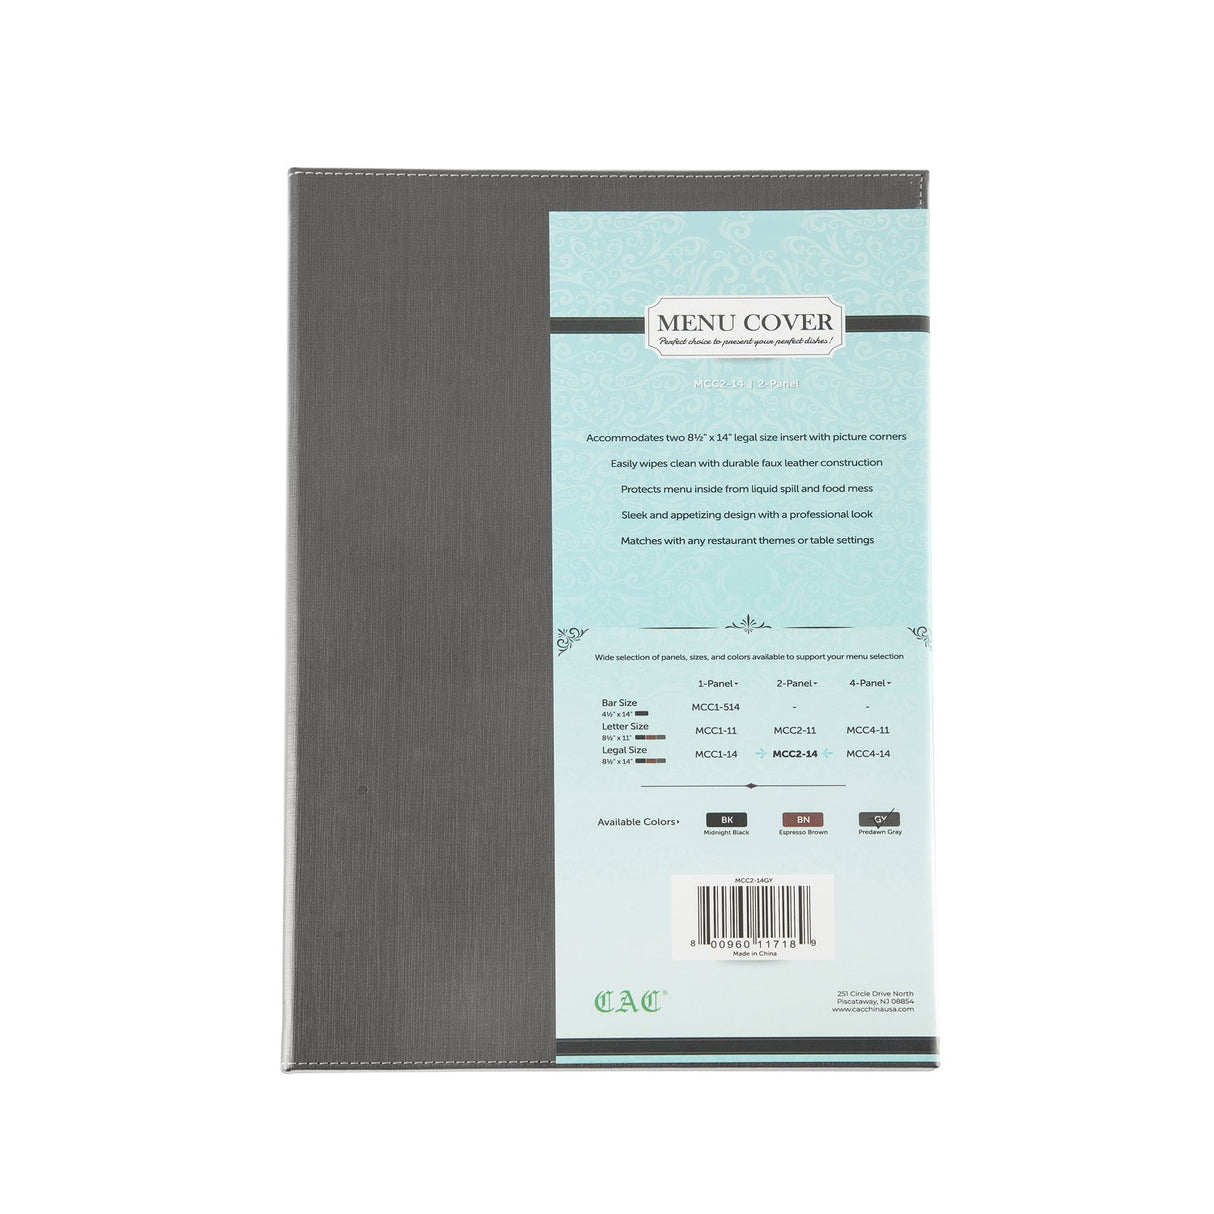 Menu Cover Faux Leather 2-Panel Gray 8-1/2x14"